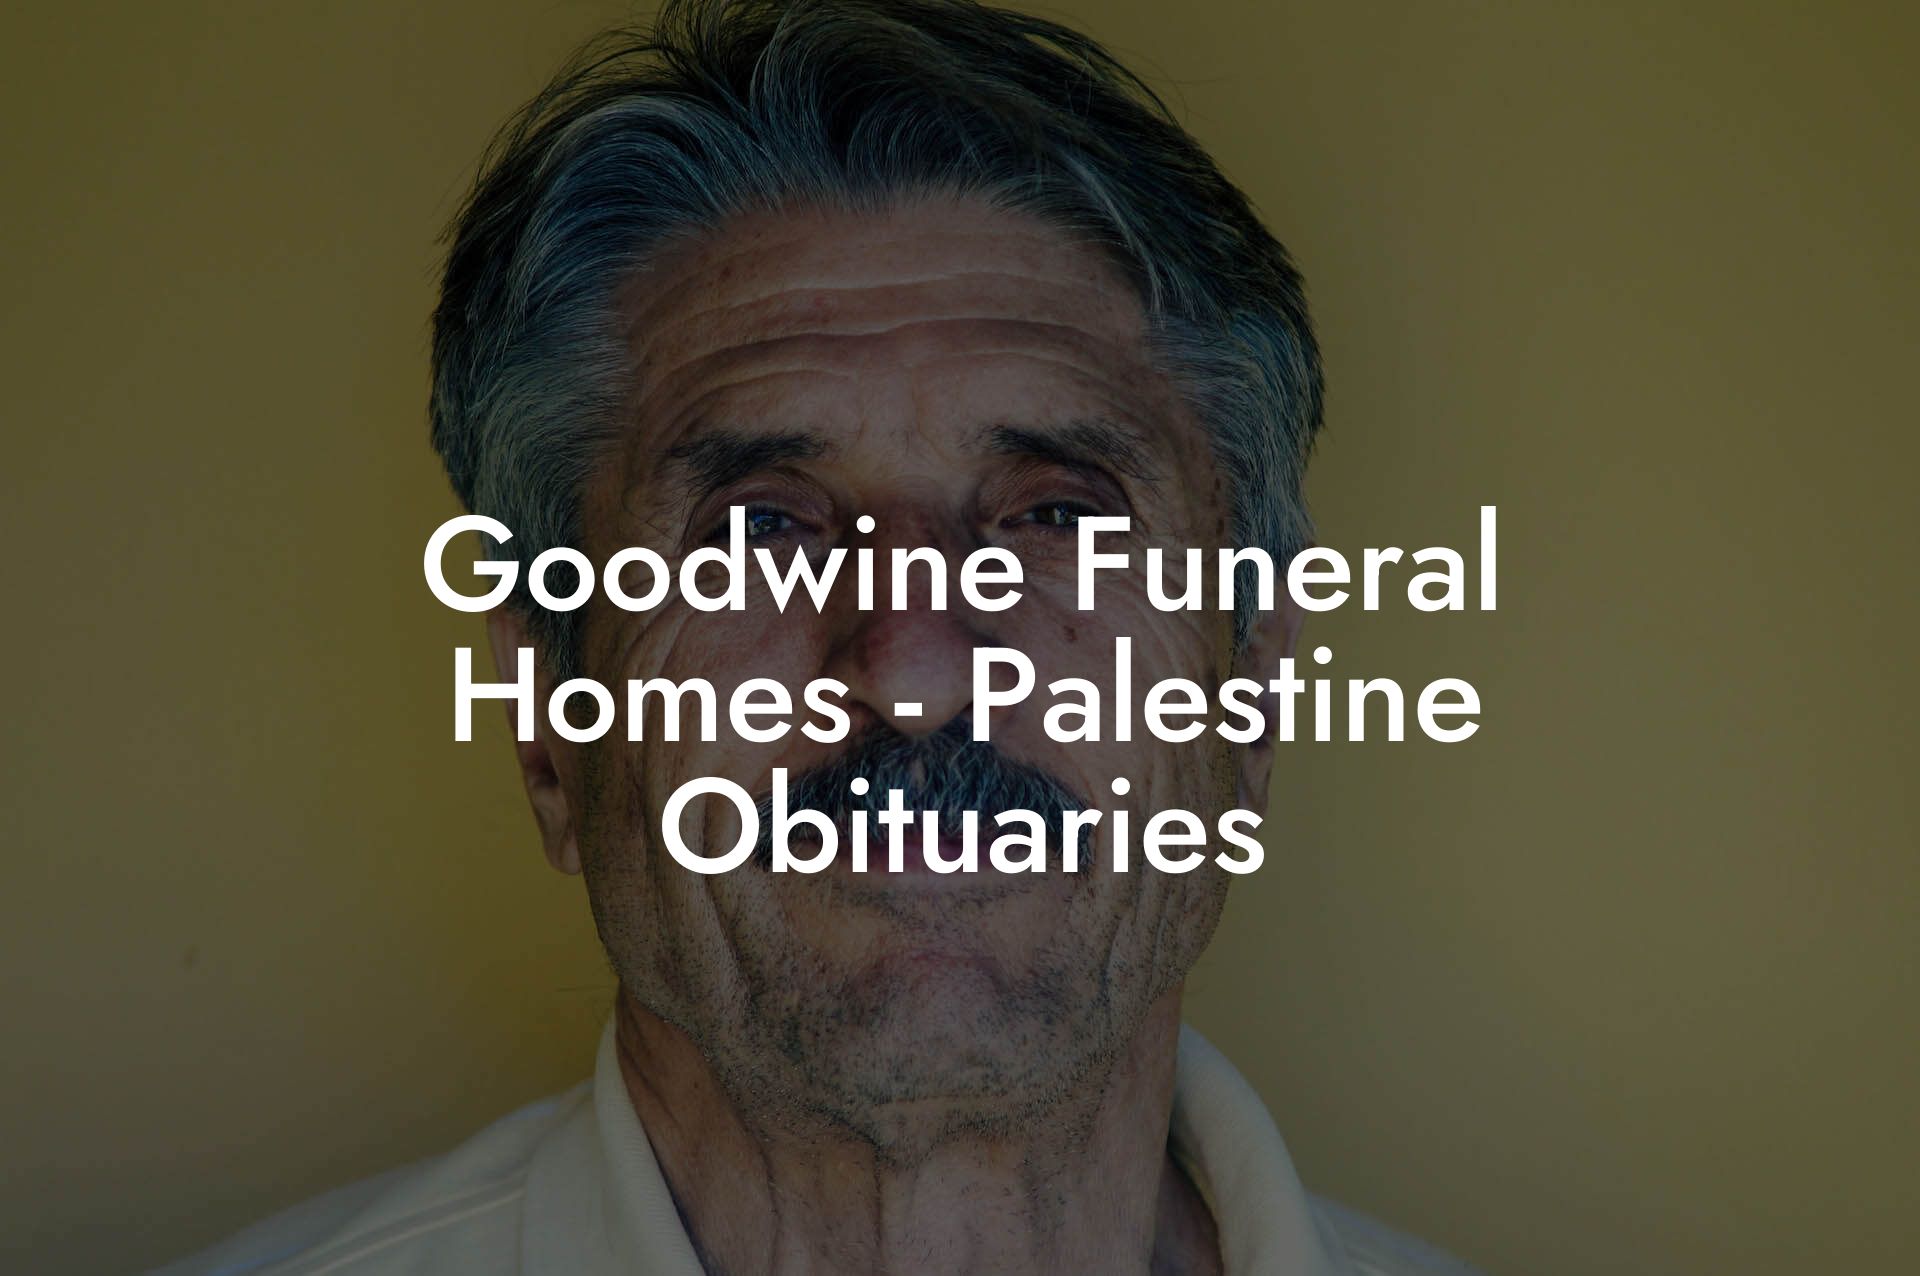 Goodwine Funeral Homes - Palestine Obituaries